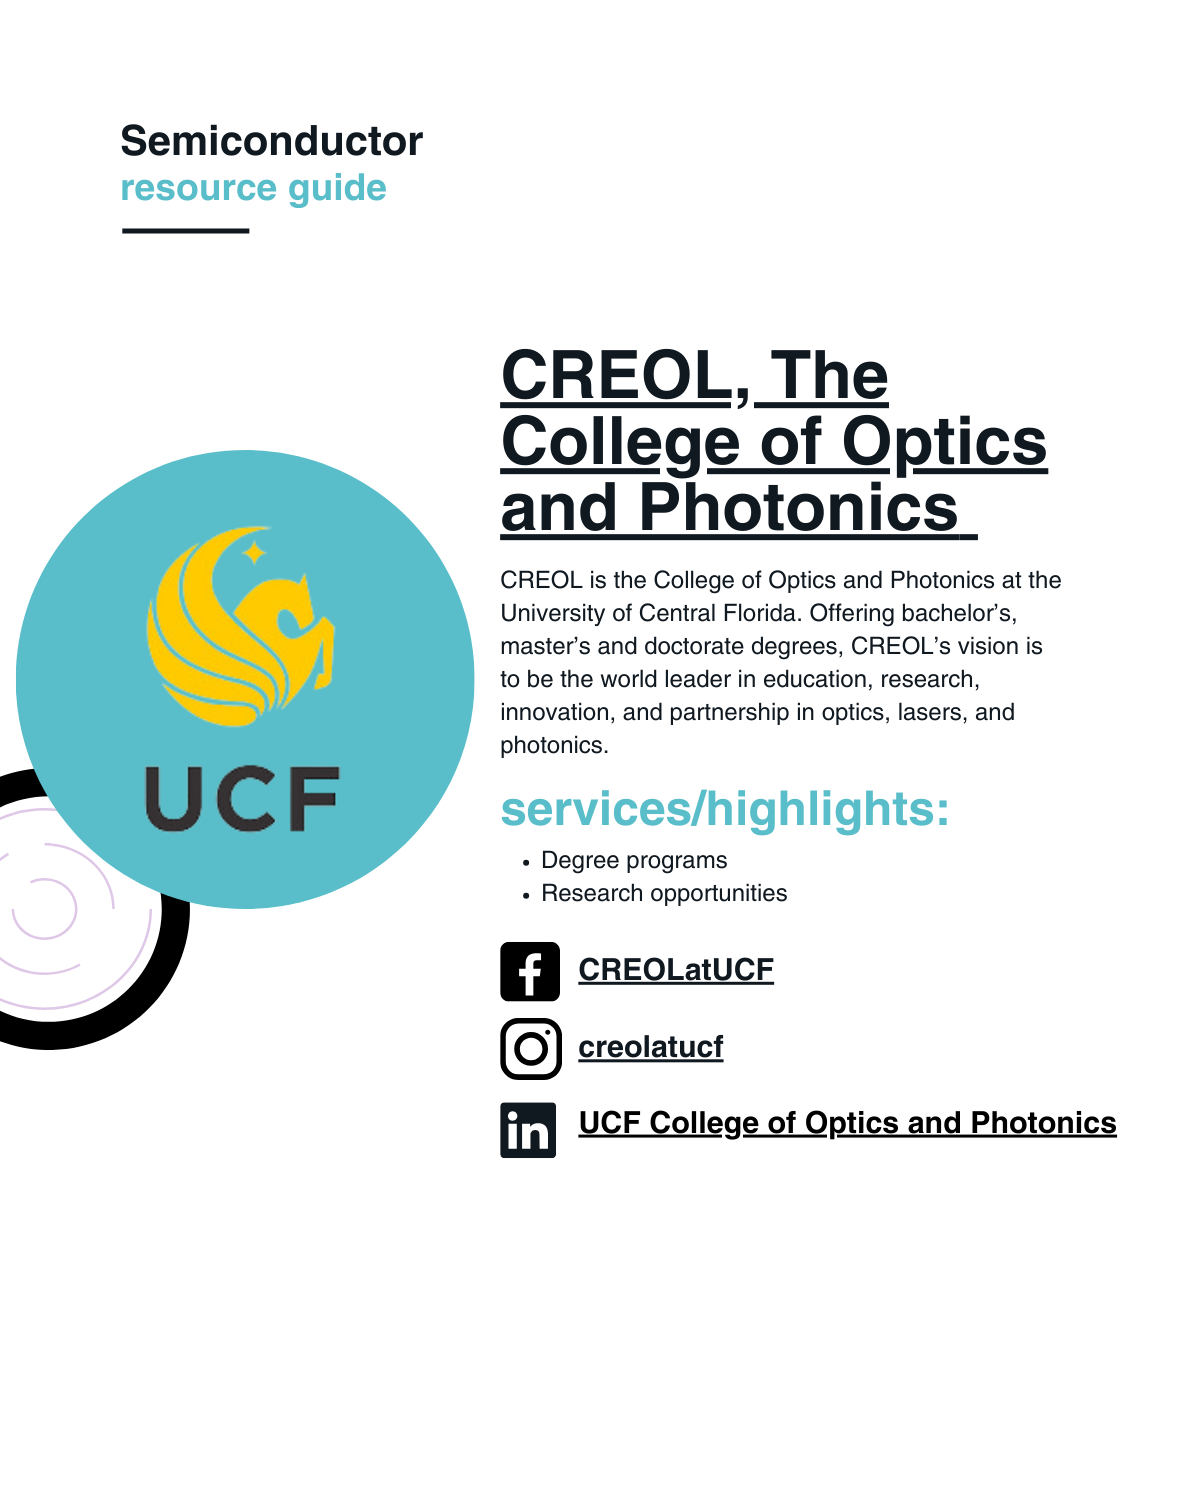 CREOL is the College of Optics and Photonics at the University of Central Florida. Offering bachelor’s, master’s and doctorate degrees, CREOL’s vision is to be the world leader in education, research, innovation, and partnership in optics, lasers, and photonics.